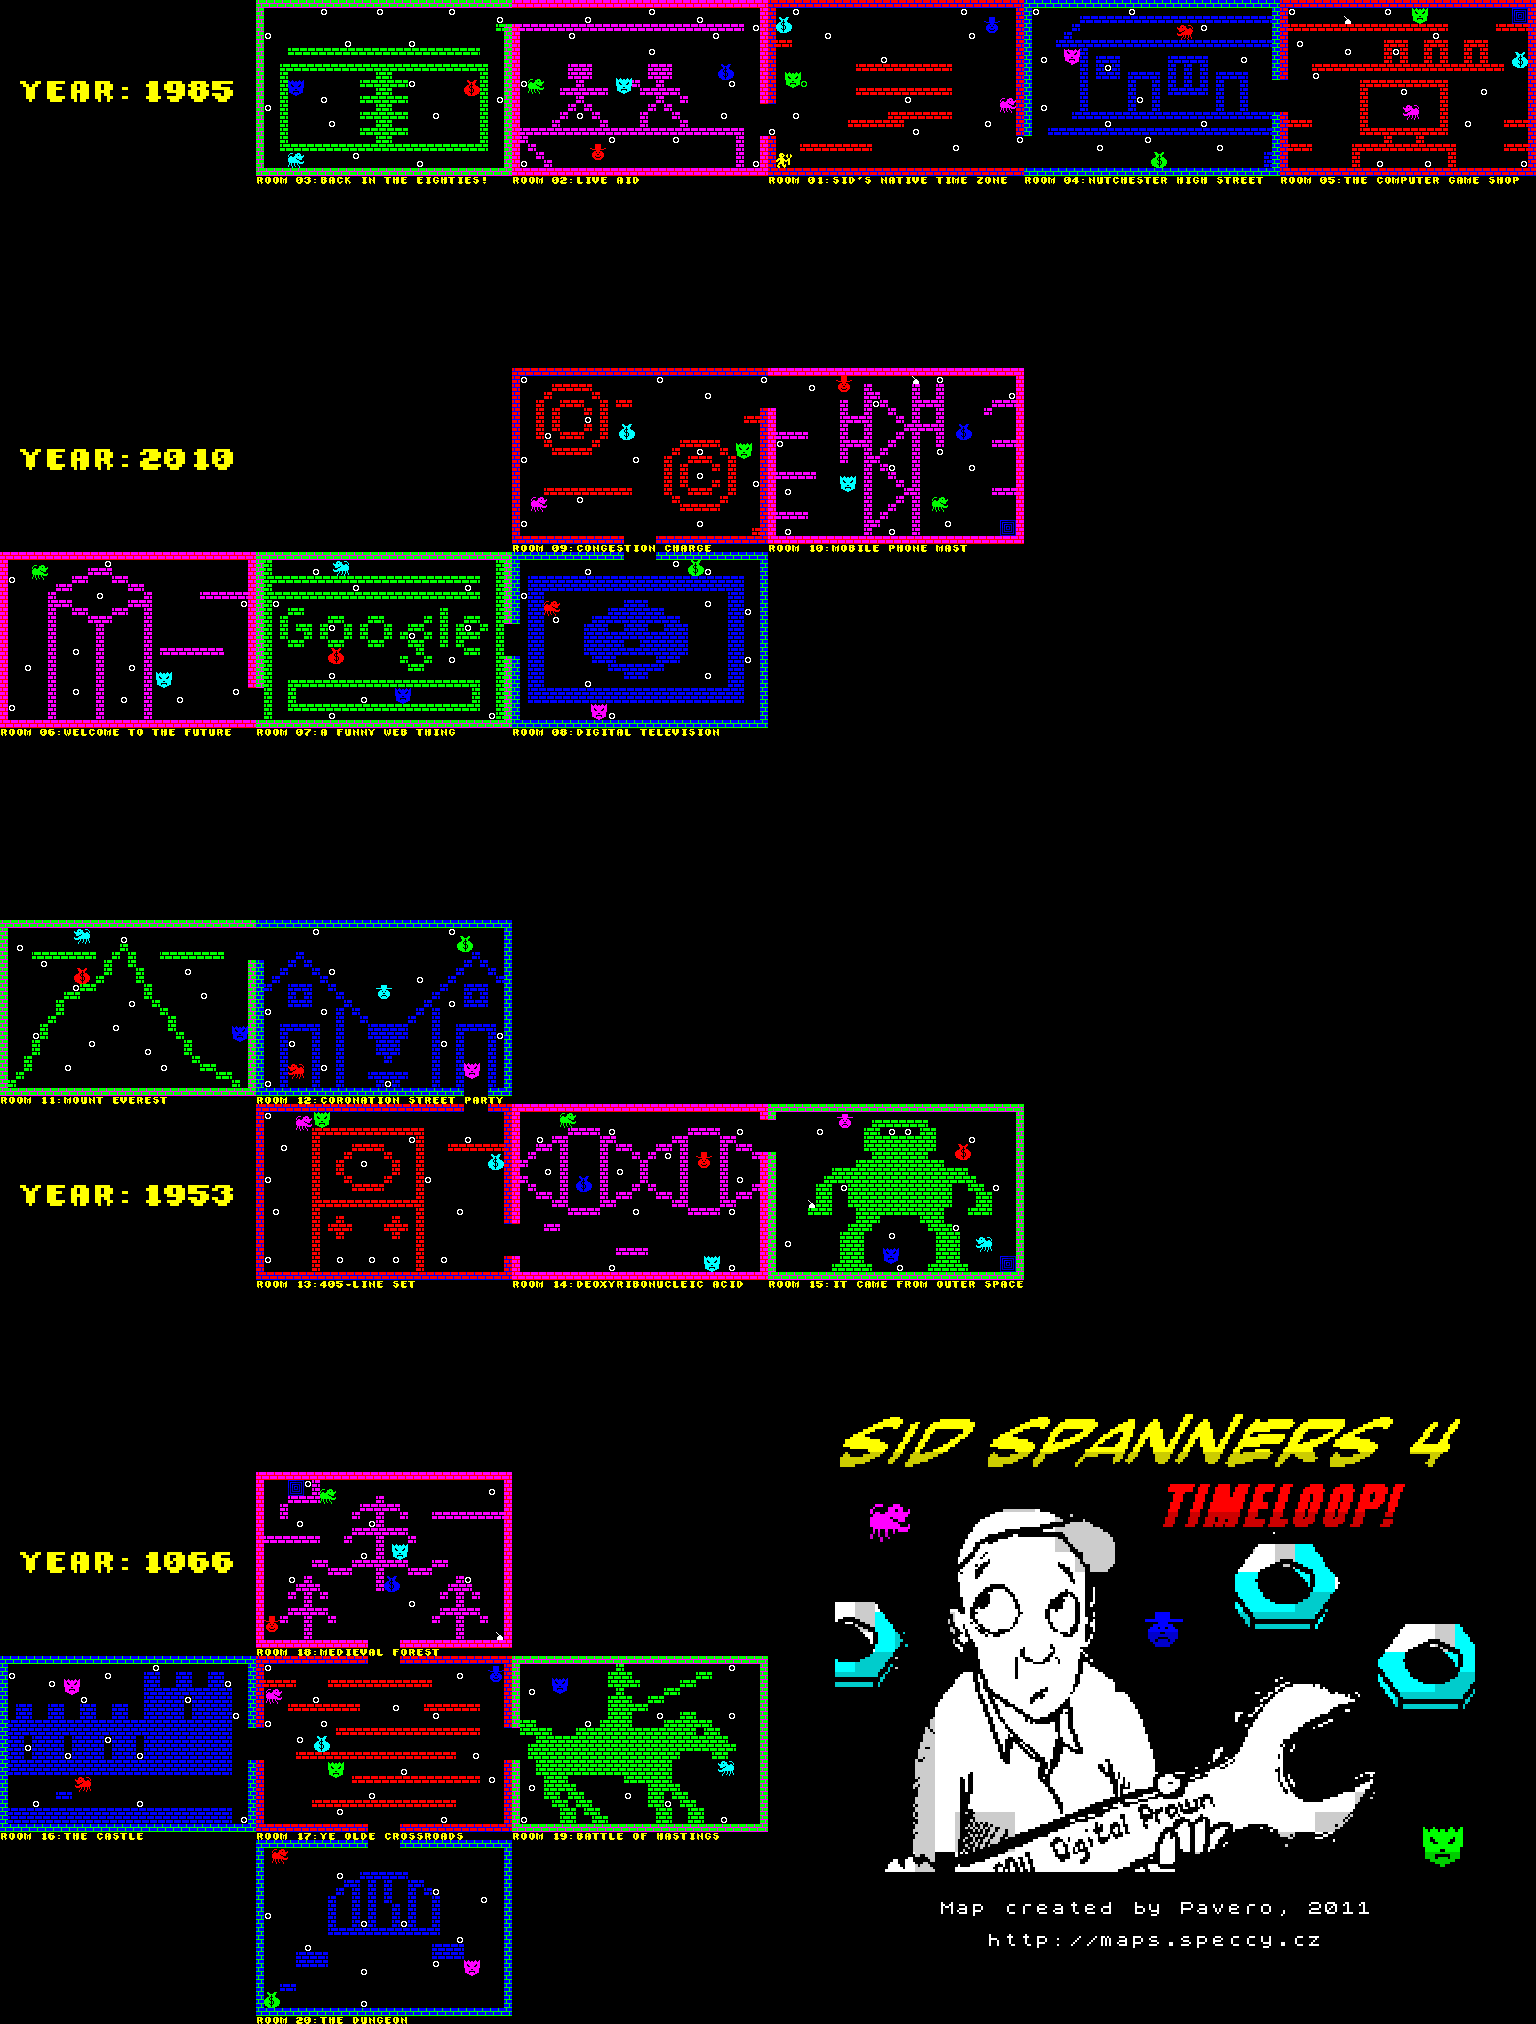 Sid Spanners 4 - Timeloop - The Map